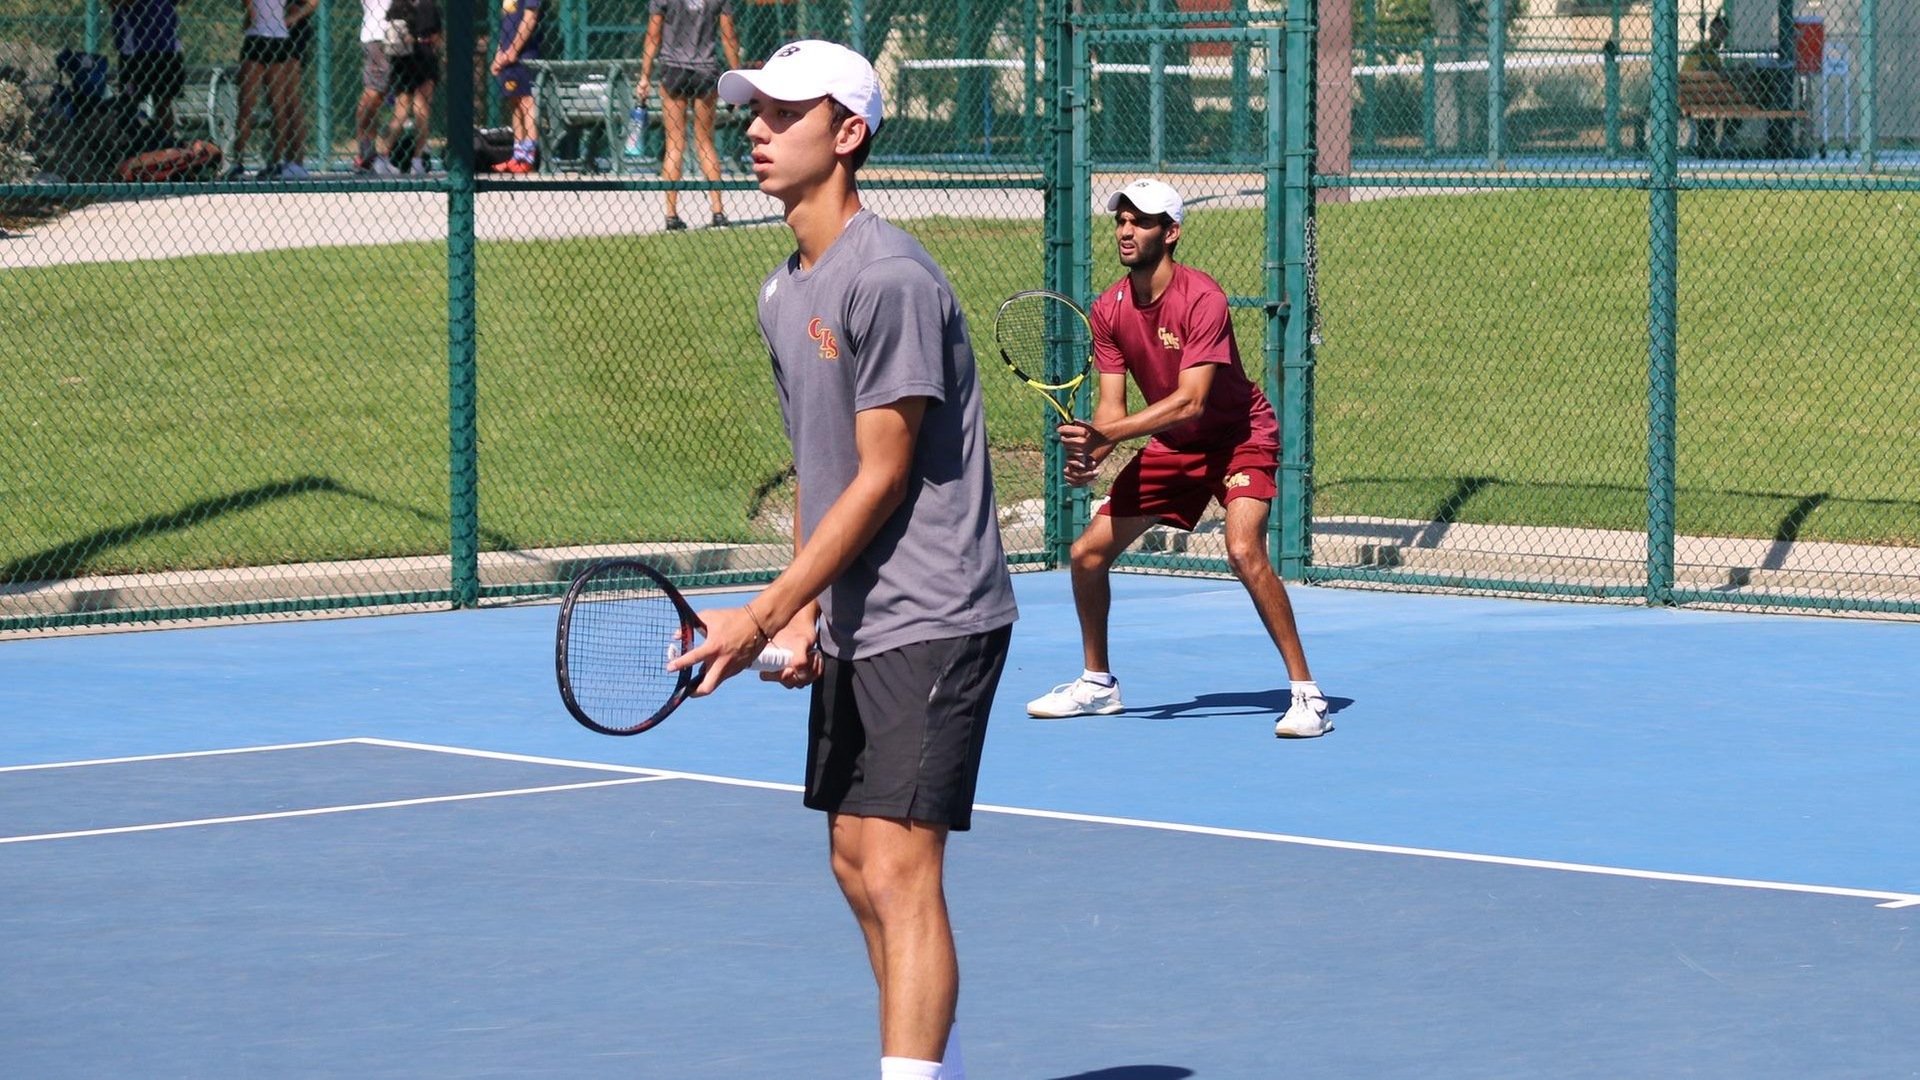 Philip Martin (foreground) and Nathan Arimilli won twice on Friday to advance to the finals